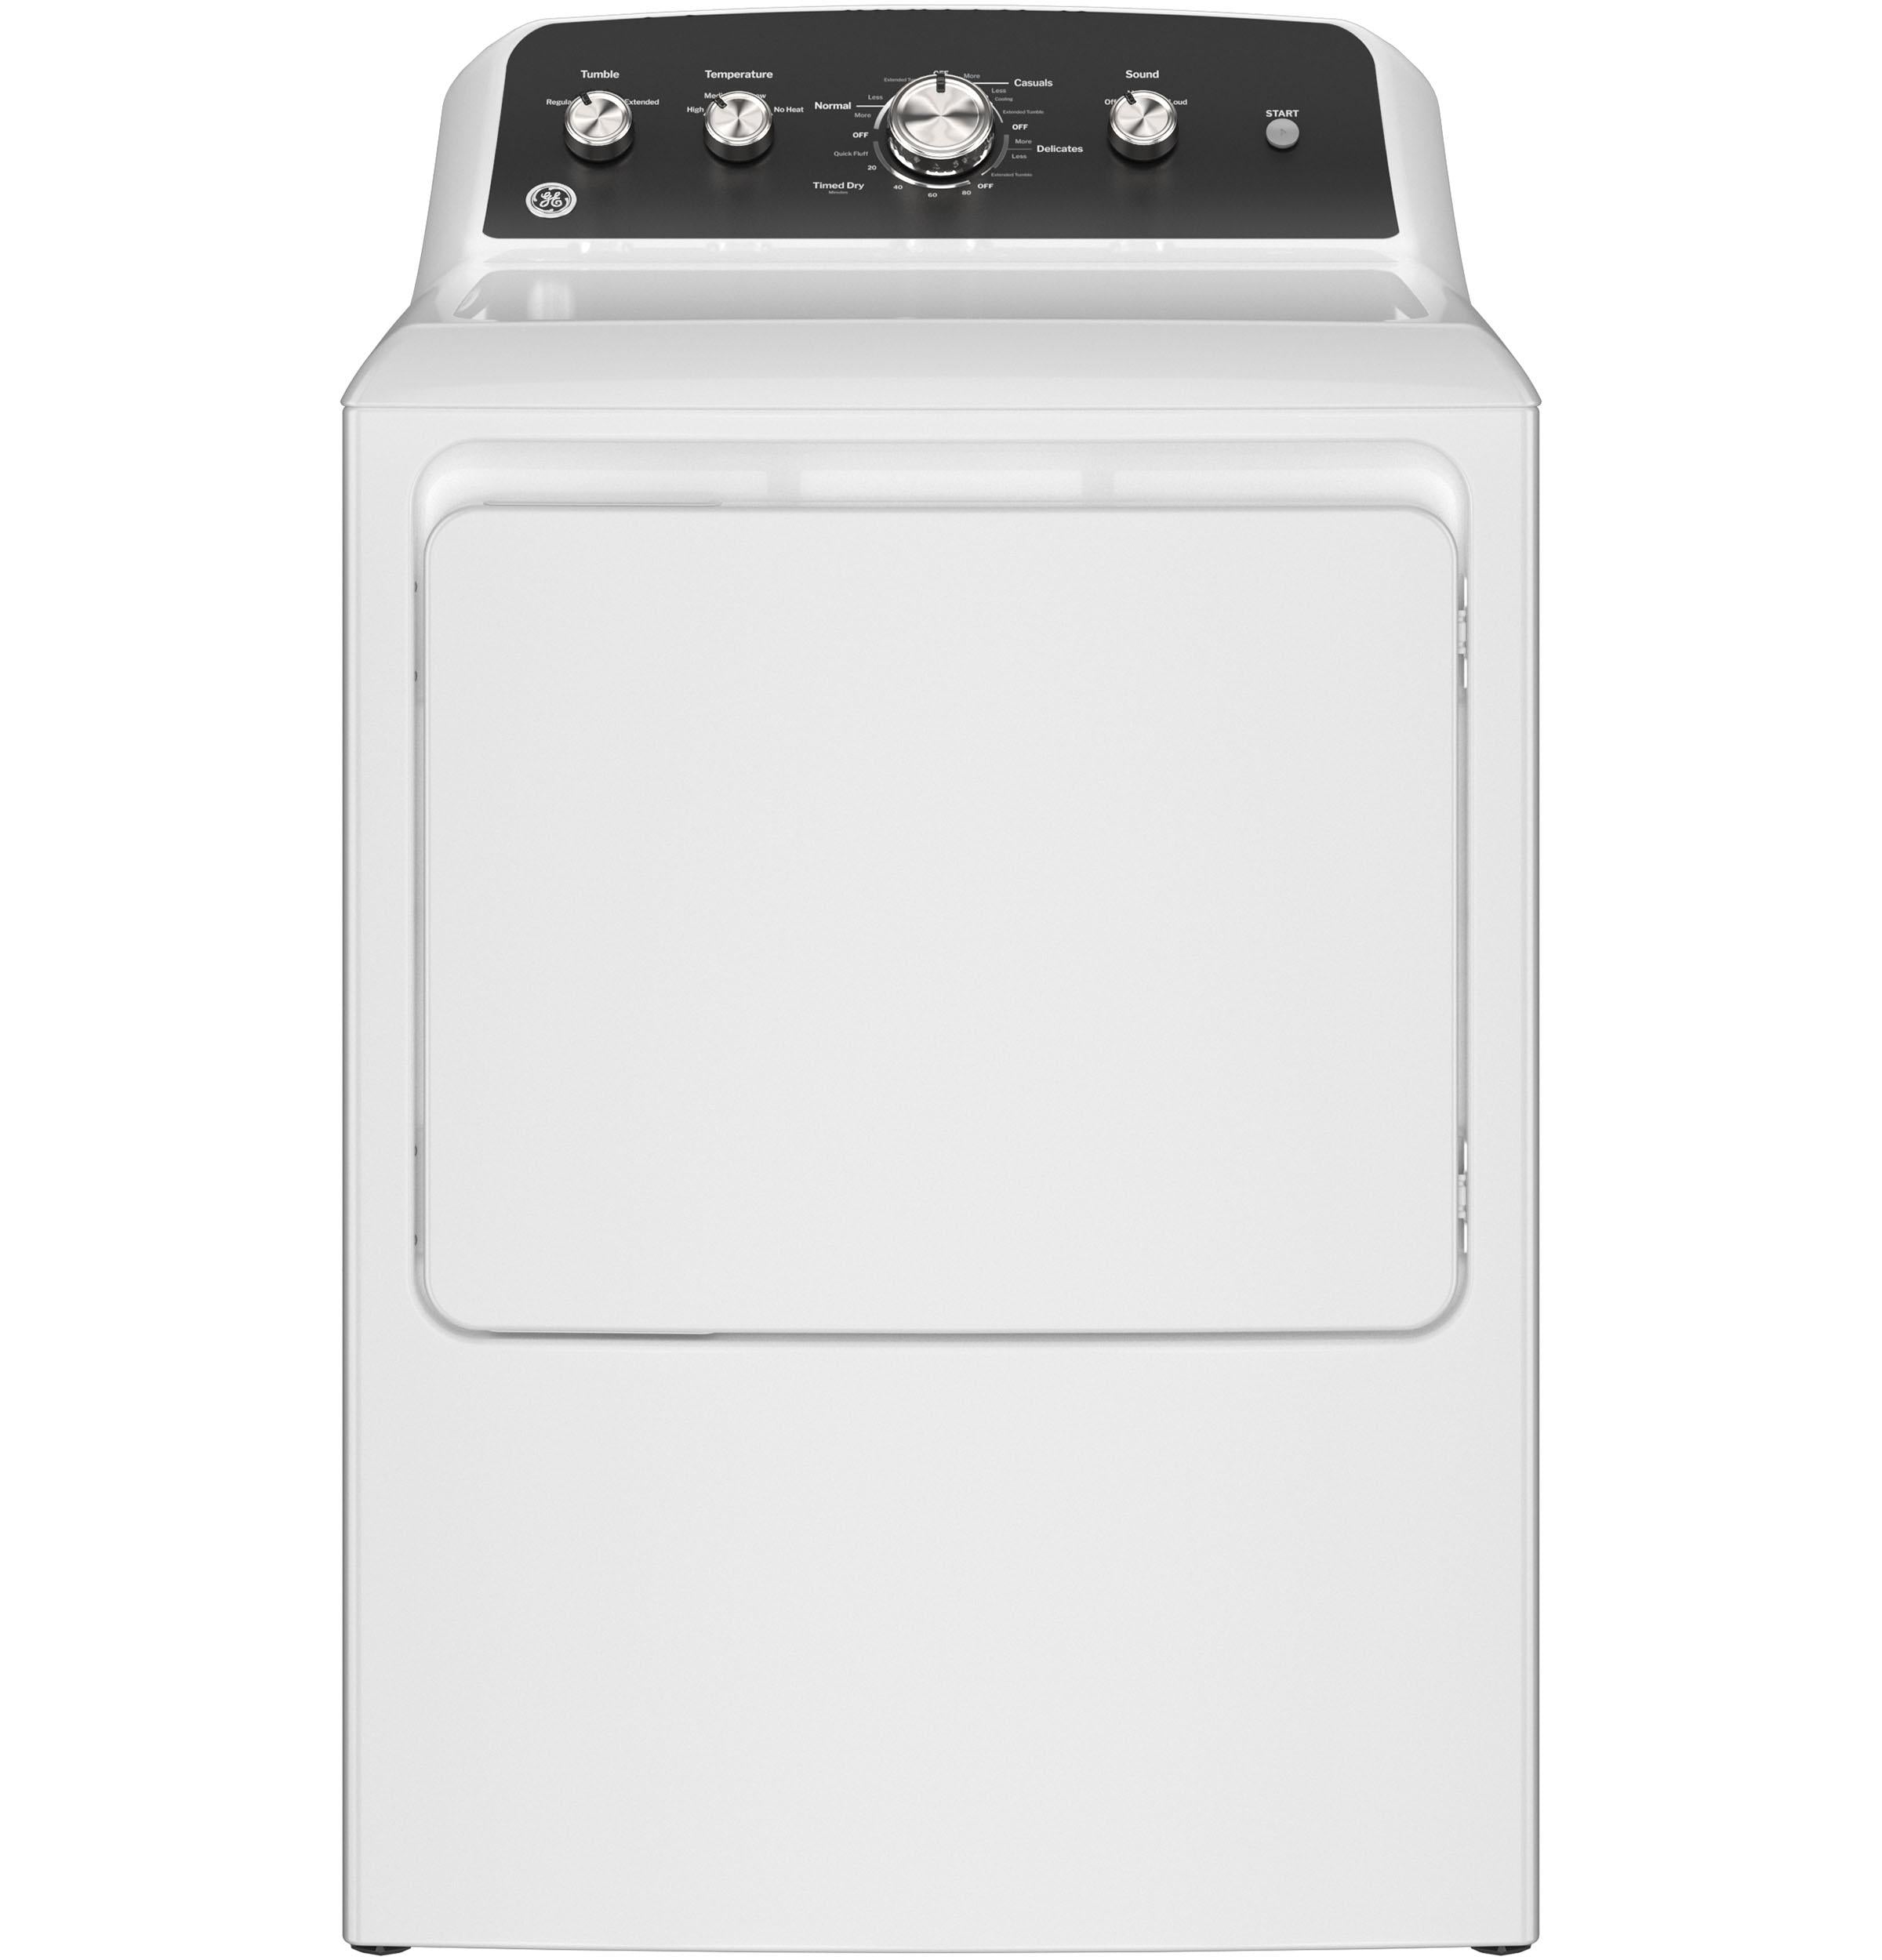 Ge Appliances GTD48EASWWB Ge® 7.2 Cu. Ft. Capacity Electric Dryer With Up To 120 Ft. Venting And Extended Tumble